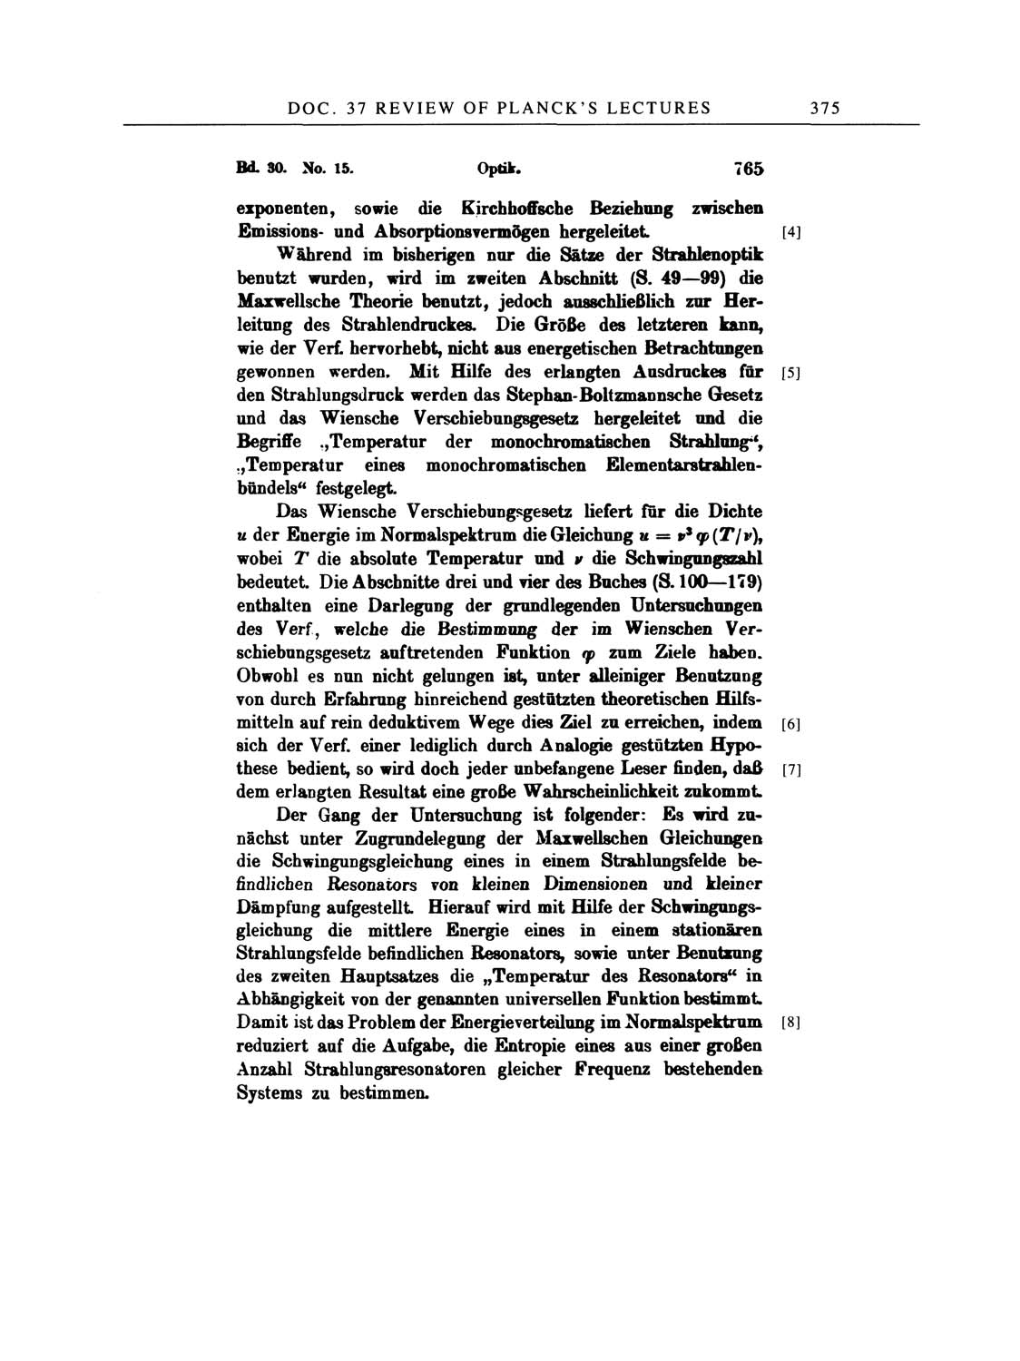 Volume 2: The Swiss Years: Writings, 1900-1909 page 375